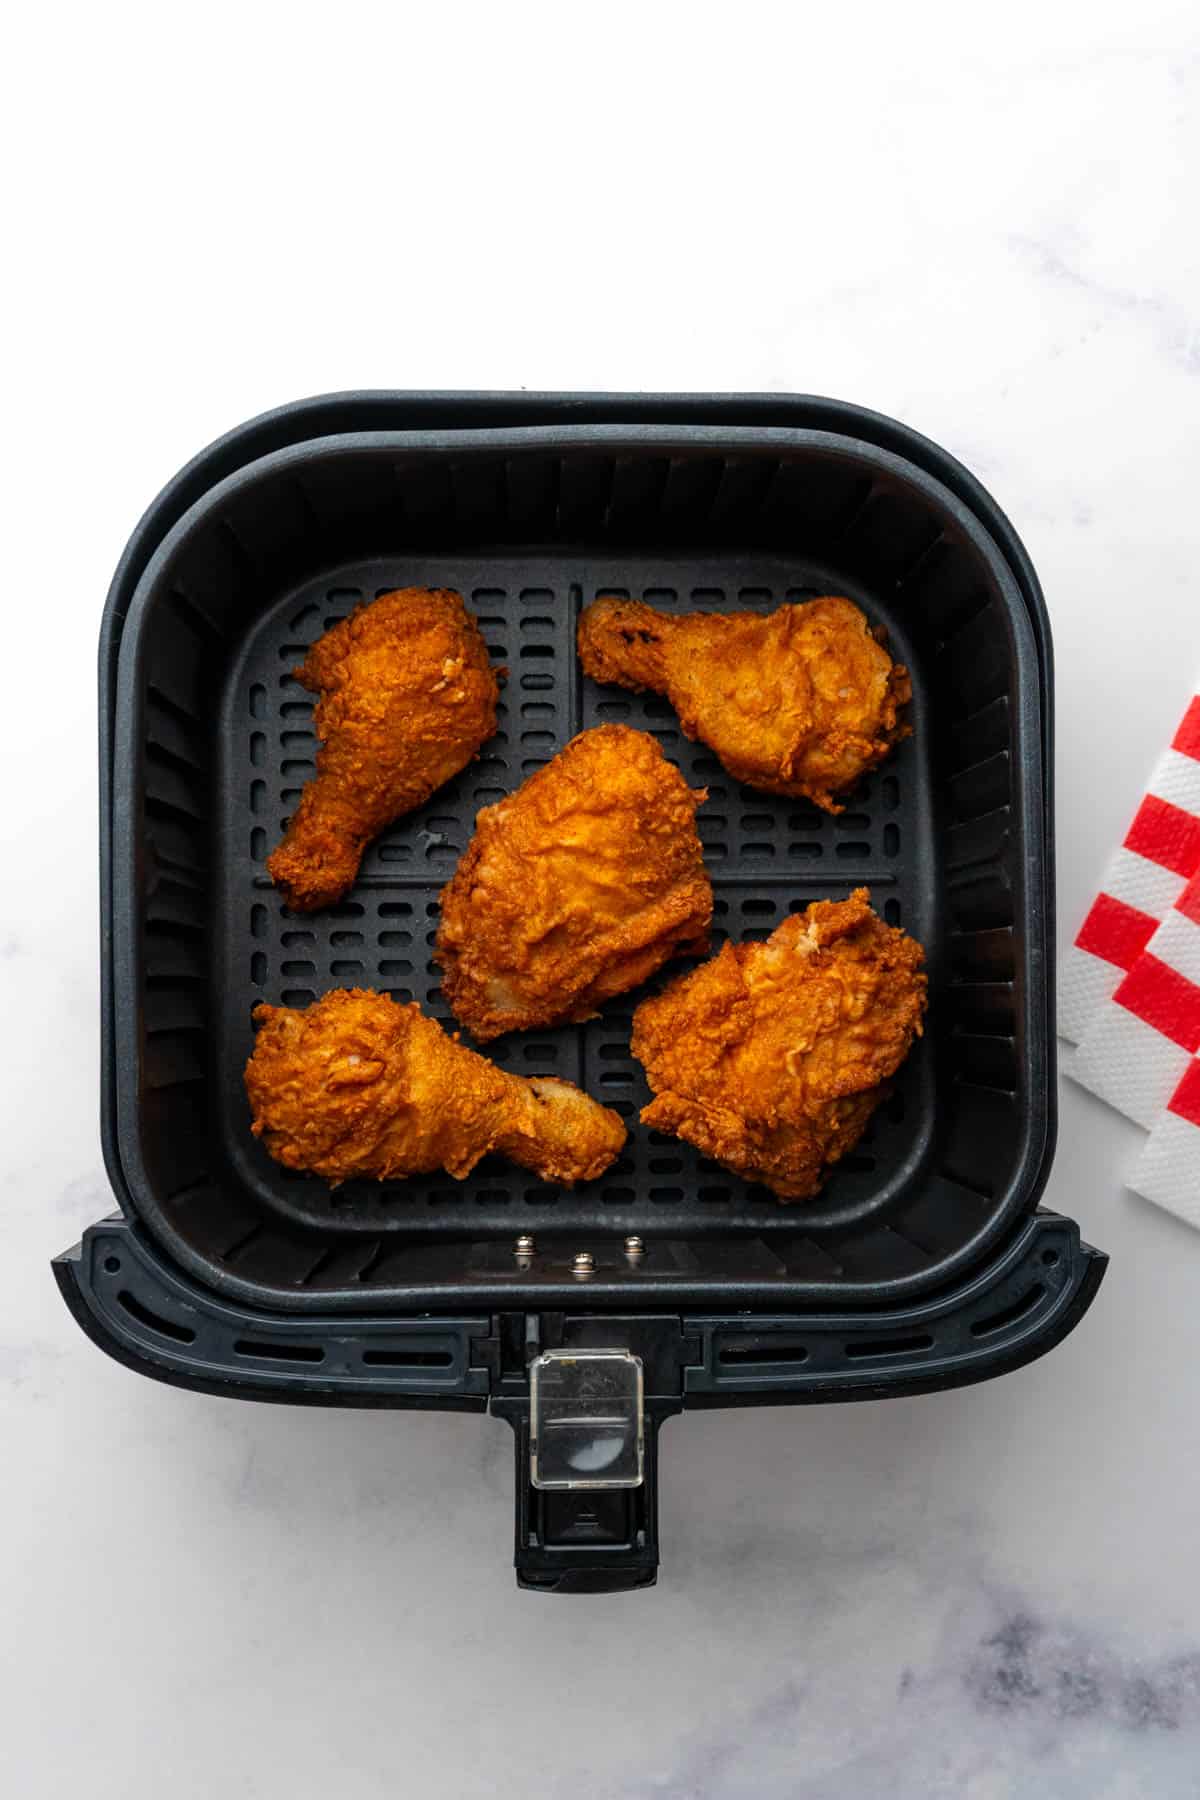 Reheated pieces of fried chicken in the air fryer basket after being reheated till crispy. 